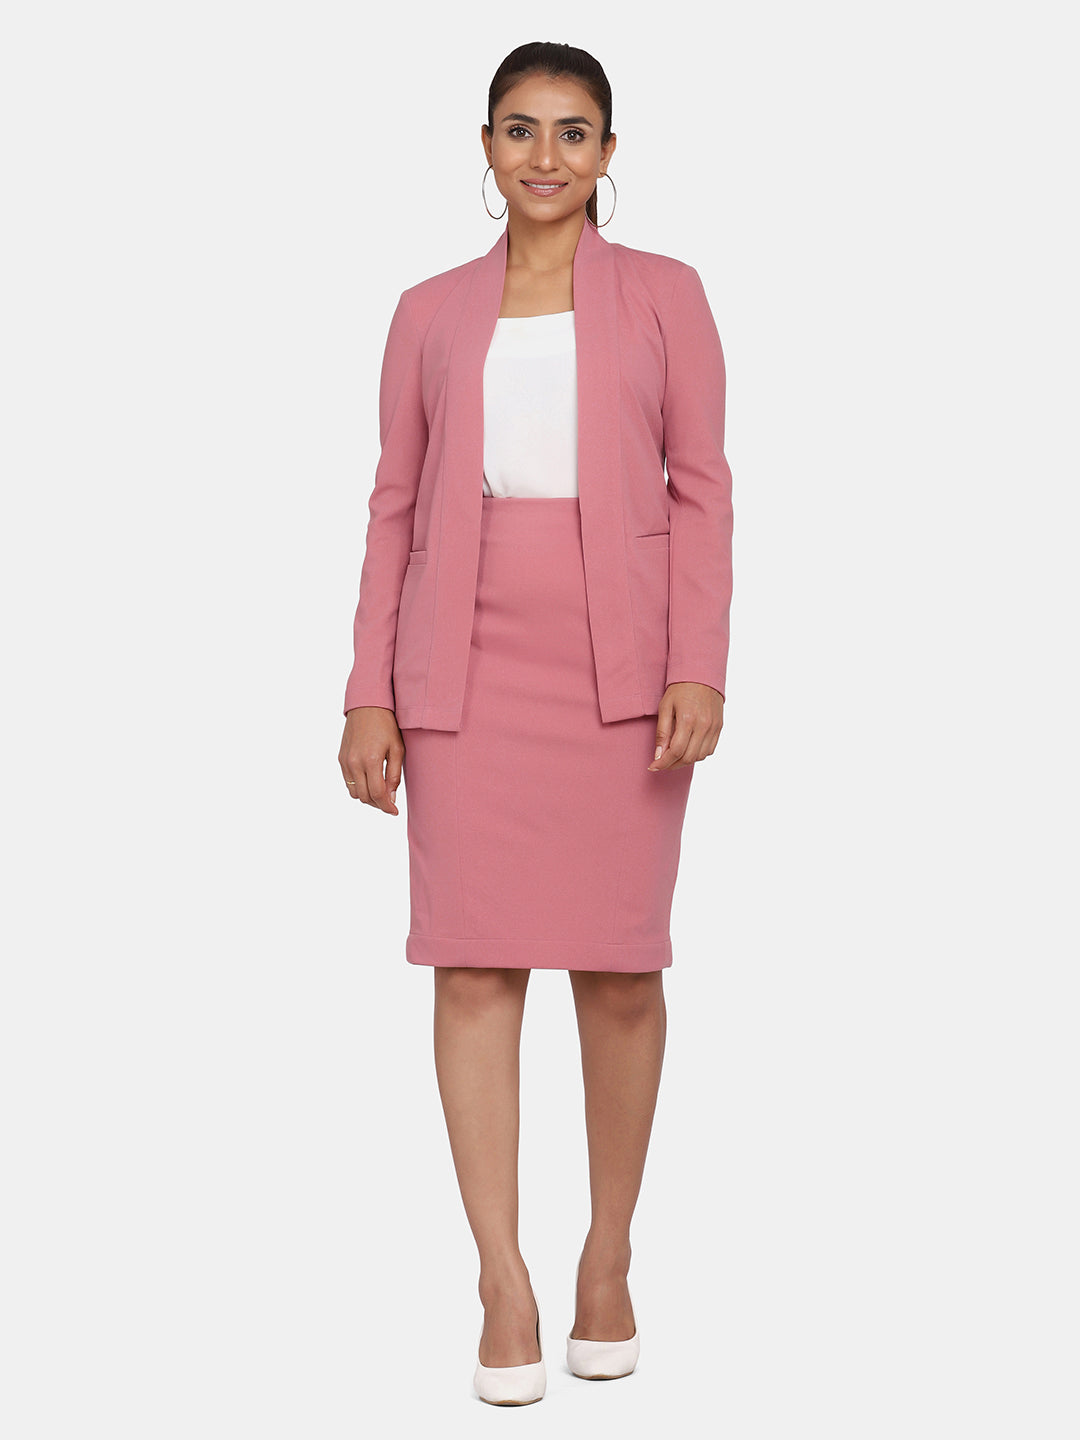 Women's Work Formal Stretch Skirt Suit - Pink